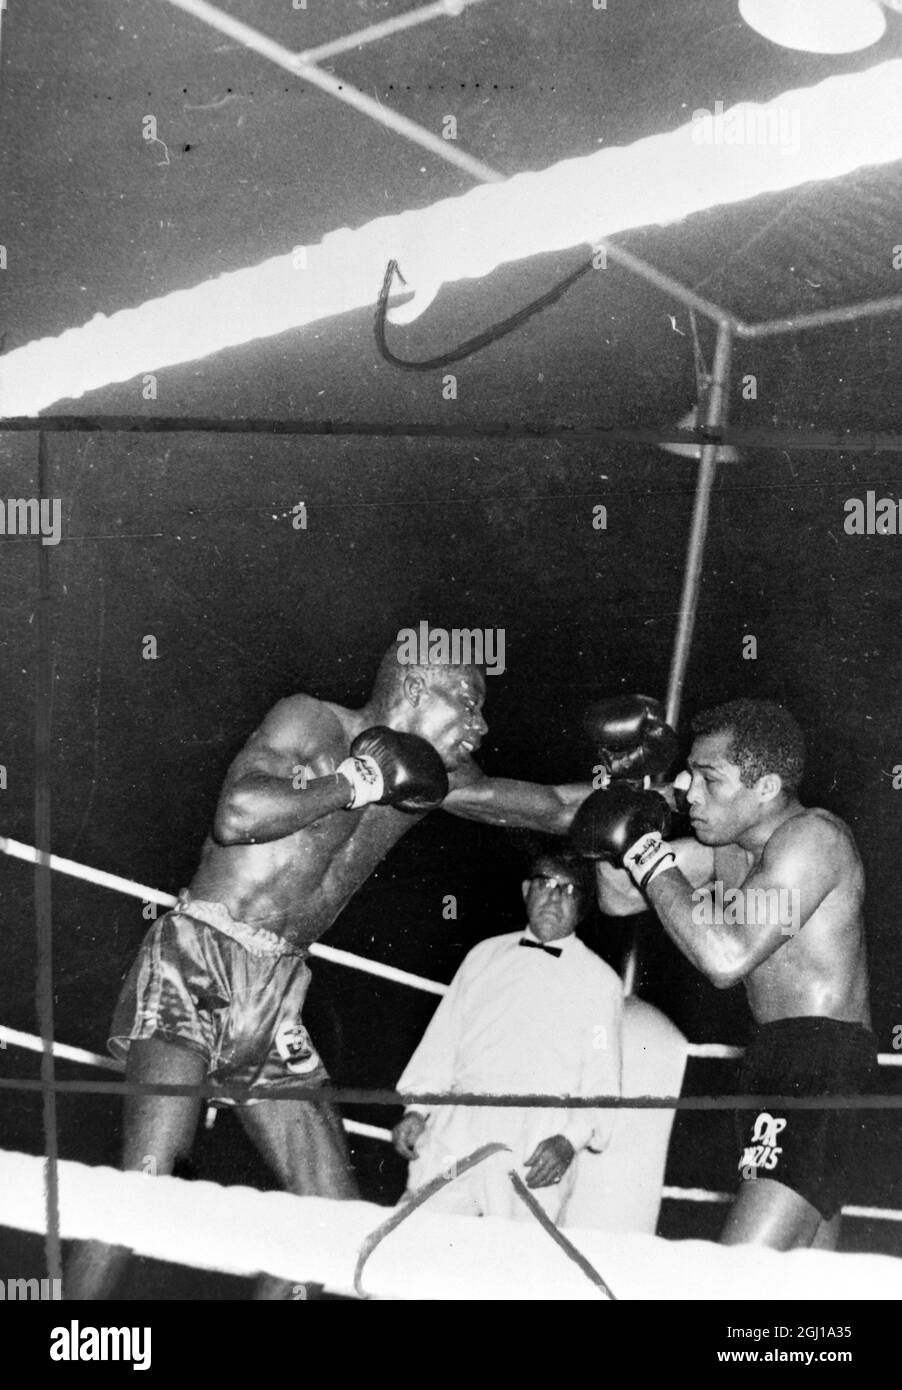 JACK HART BOXING REFEREE WITH BOXERS FLOYD ROBERTSON V SUGAR RAMOS IN ACTION IN ACCRA, GHANA ; 13 MAY 1964 Stock Photo